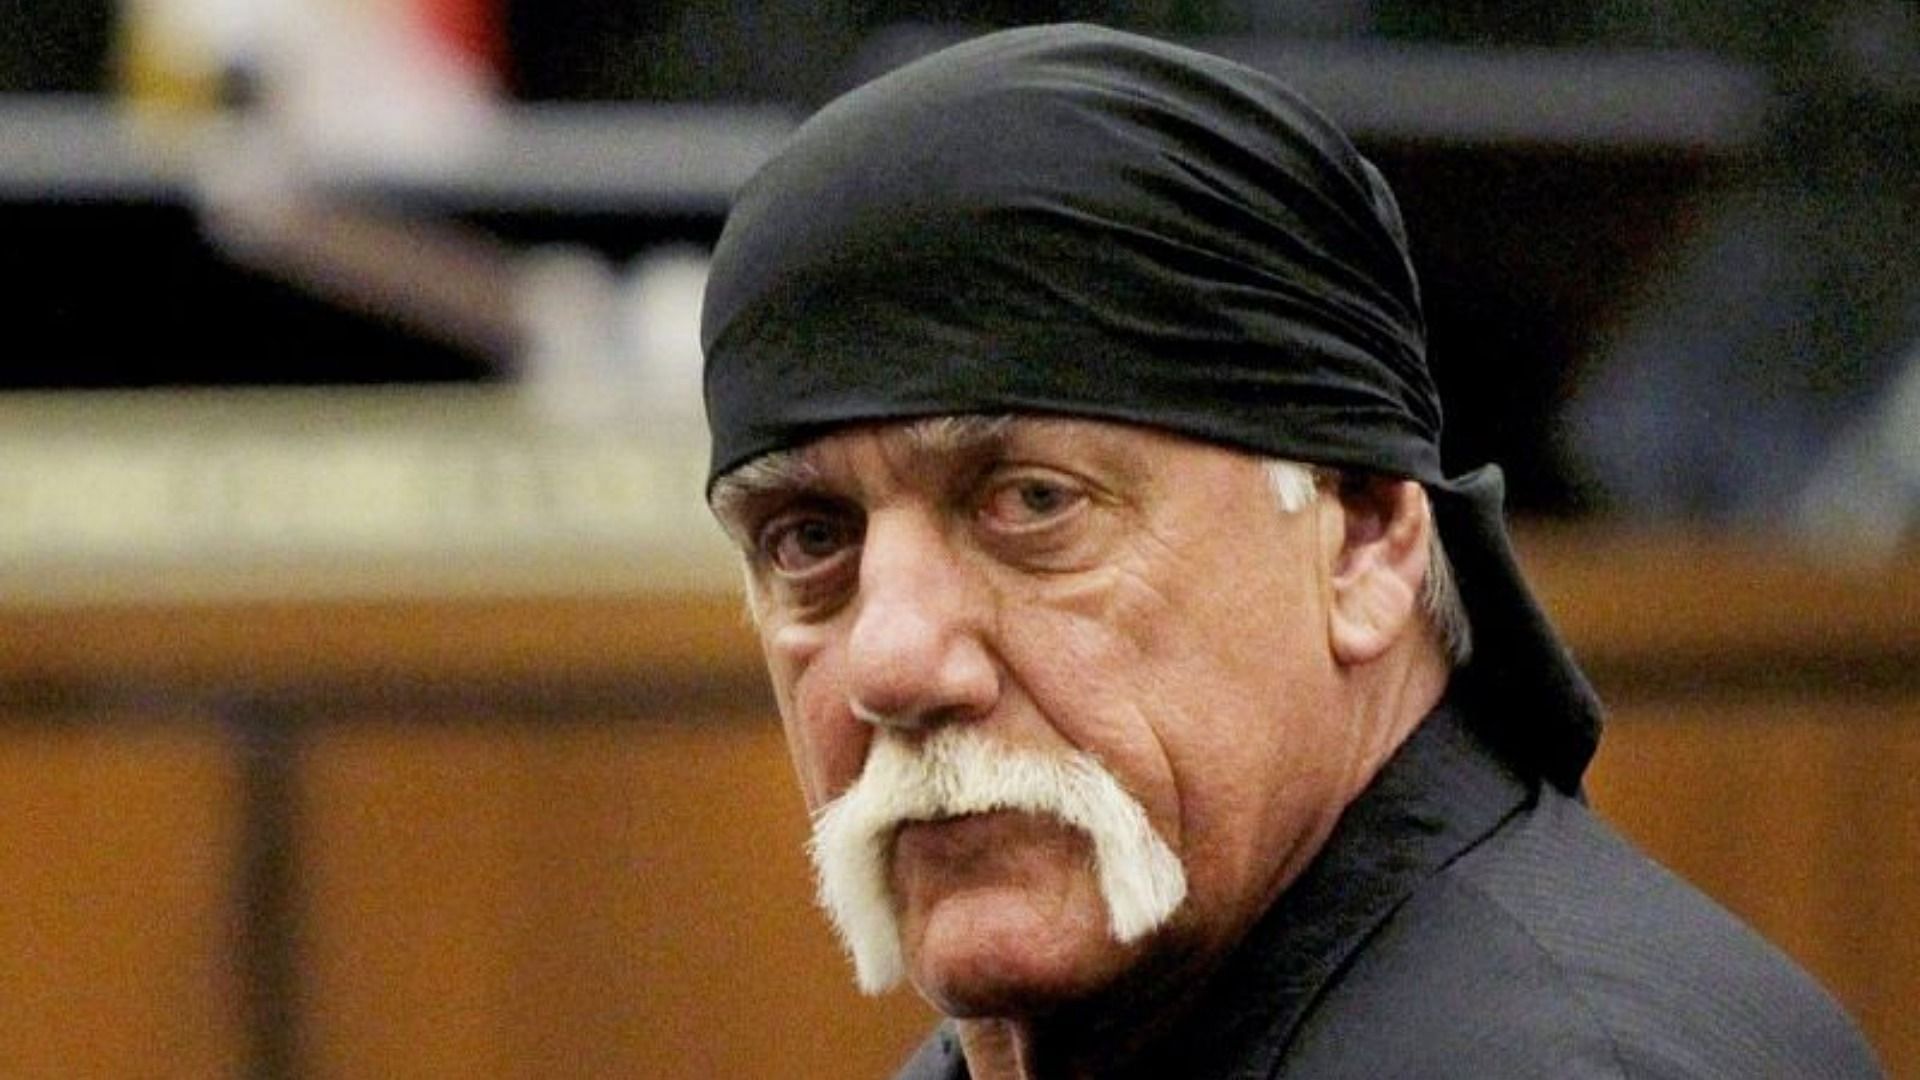 Photo: Hulk Hogan has dropped a lot of weight amidst health concerns